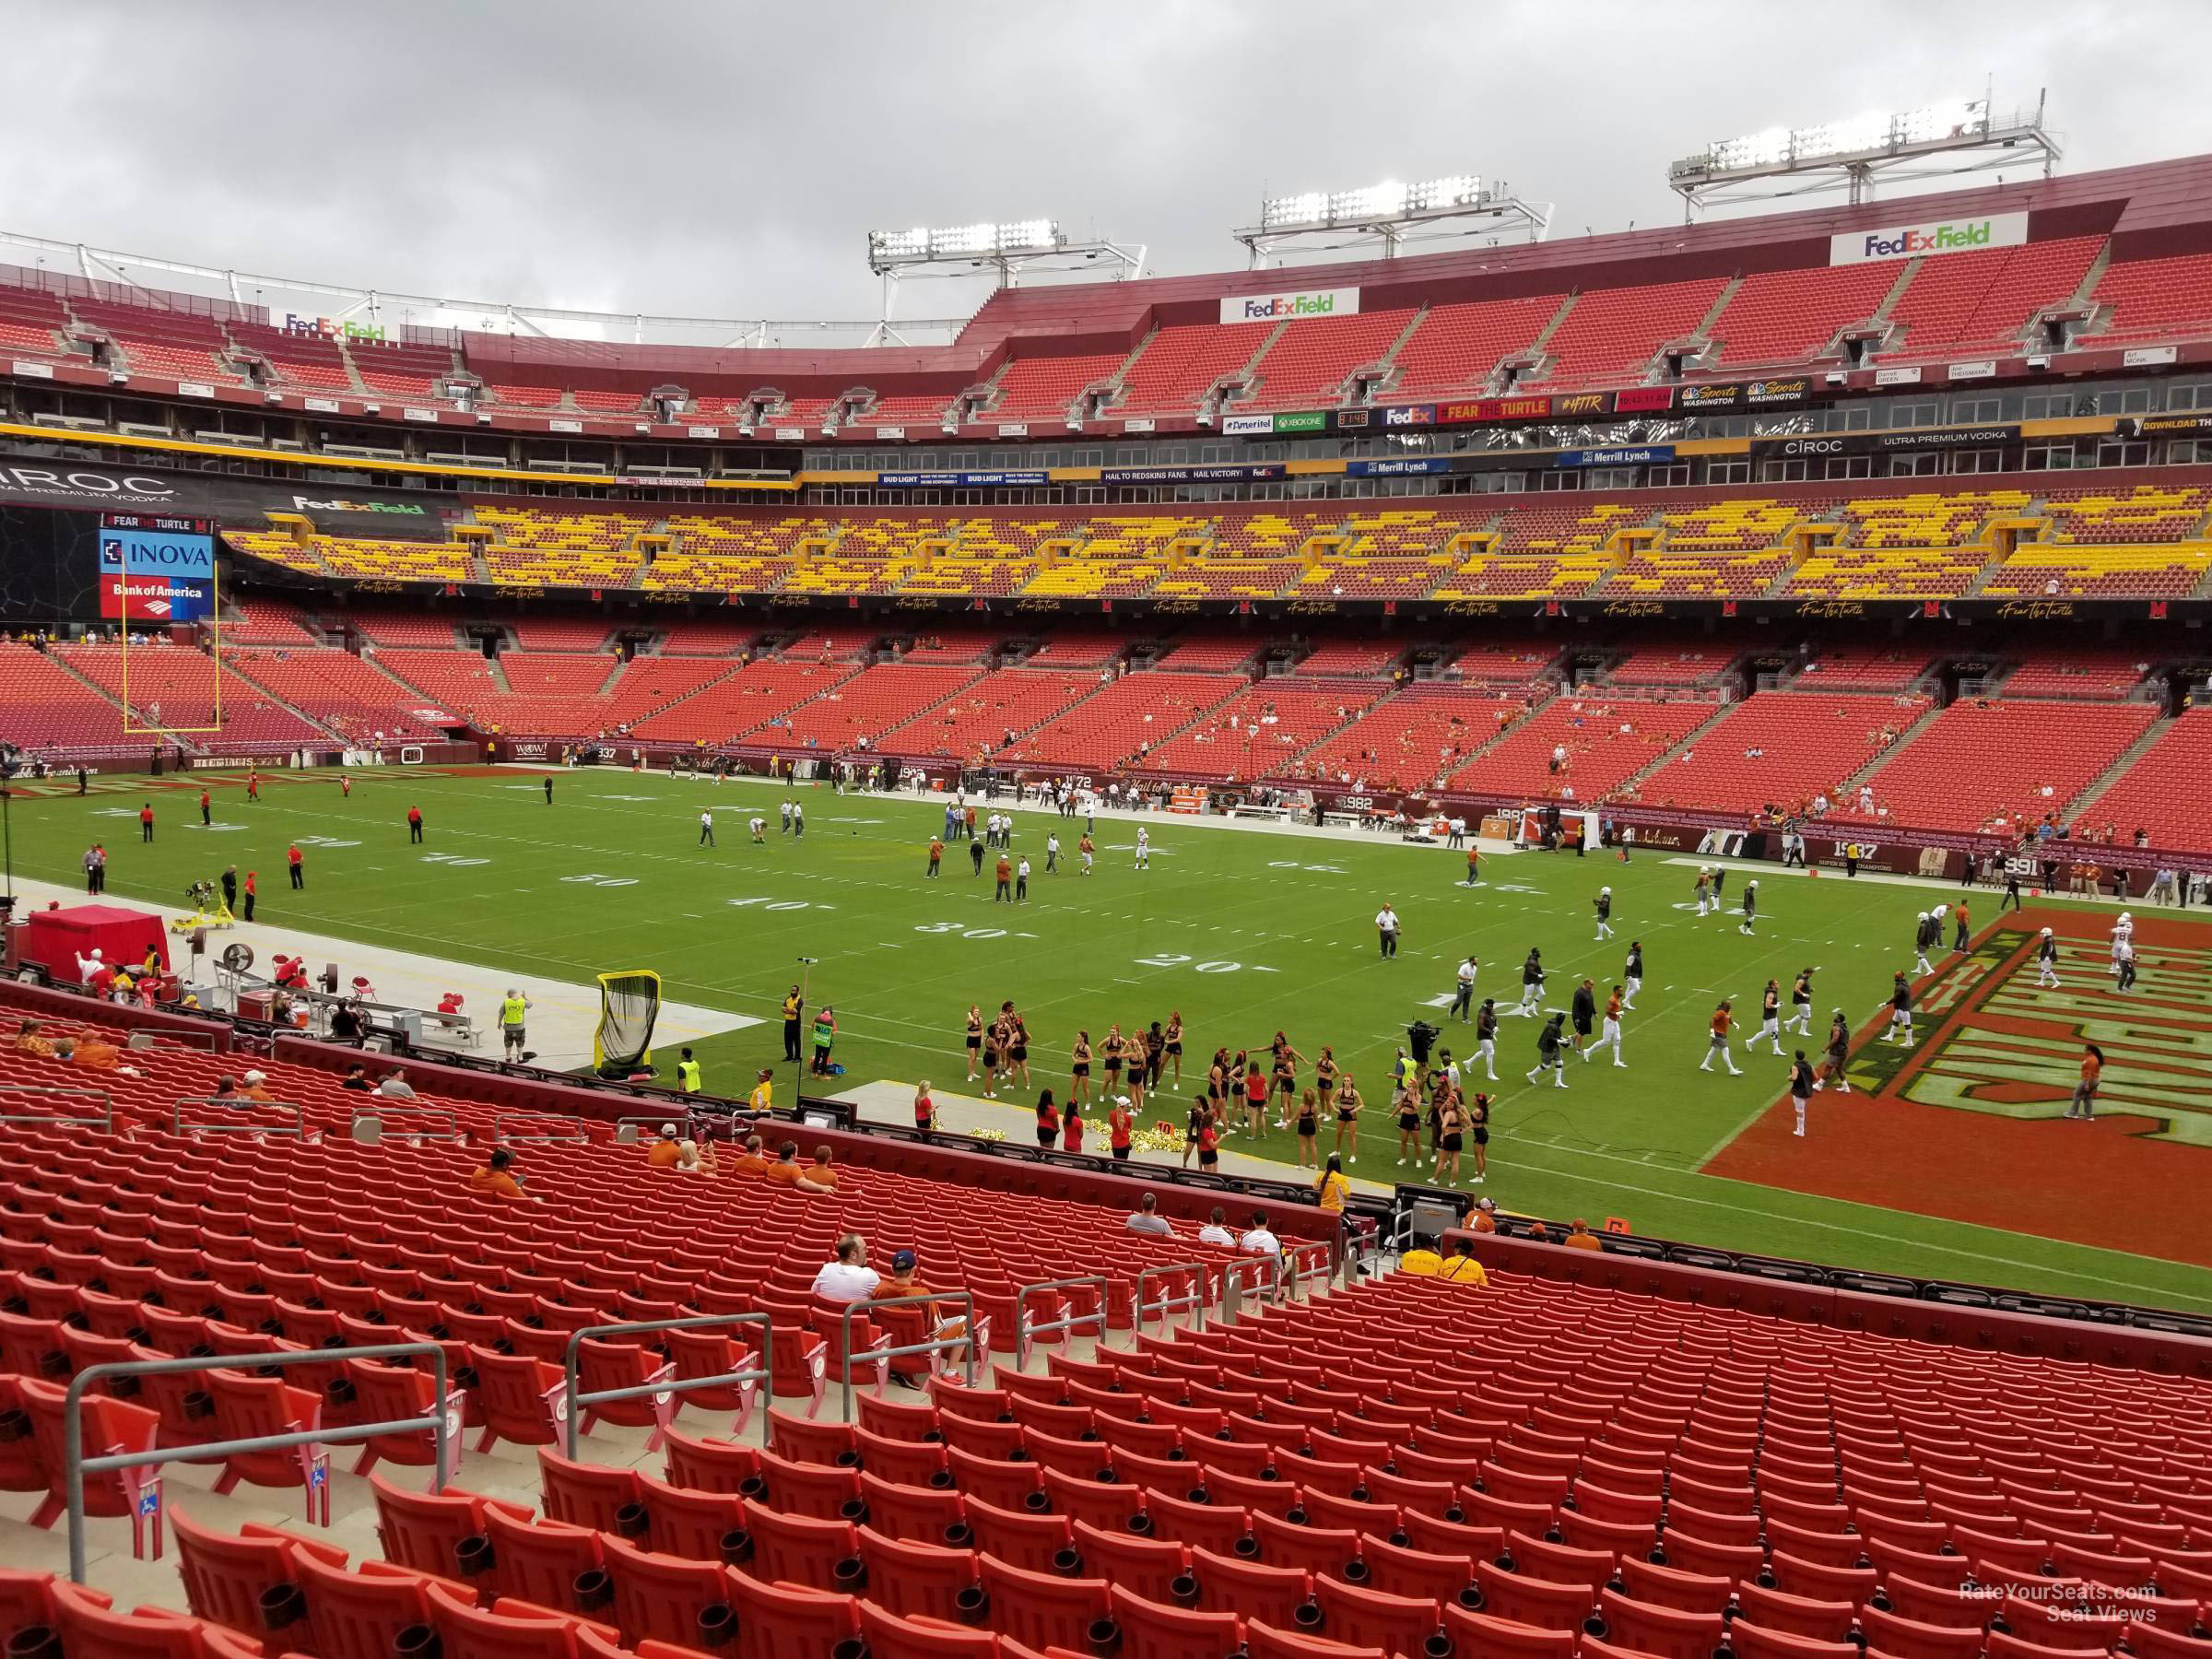 section 238, row 1 seat view  - fedexfield